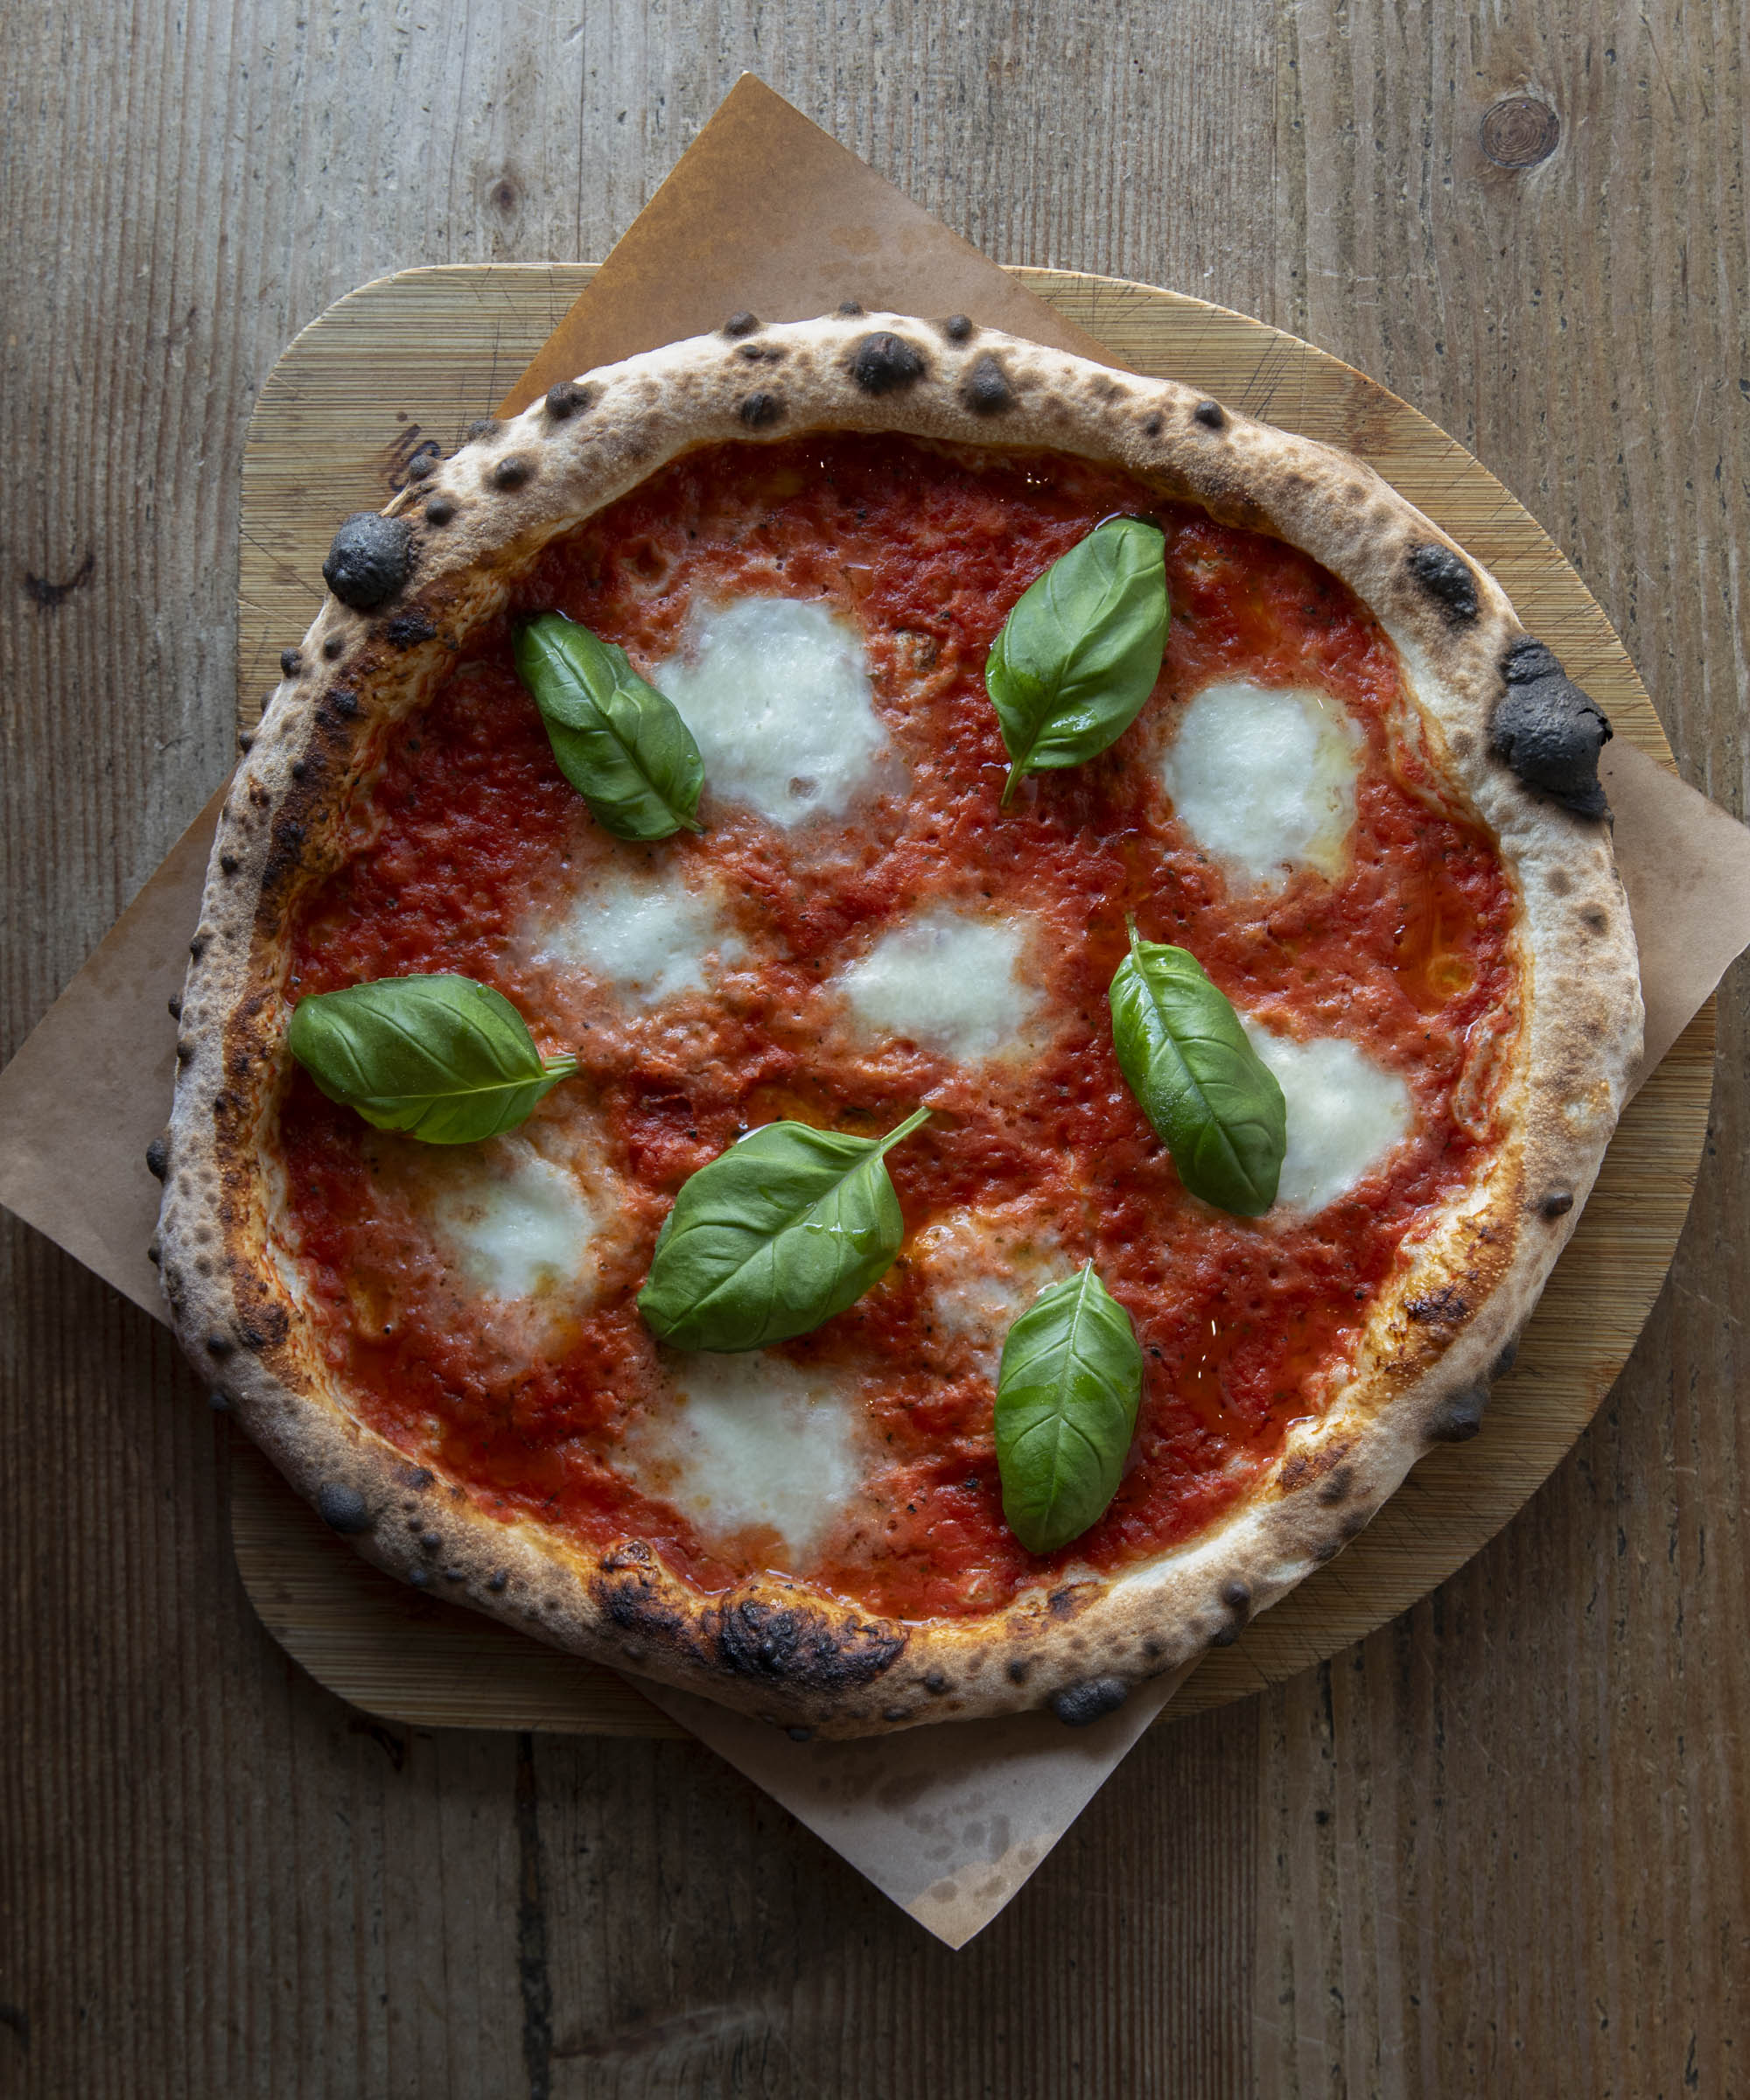 Pick any two pizzas at Behov in Nordvest and Vesterbro – After pushing pizza for almost 8 years, they’re still in the premier league